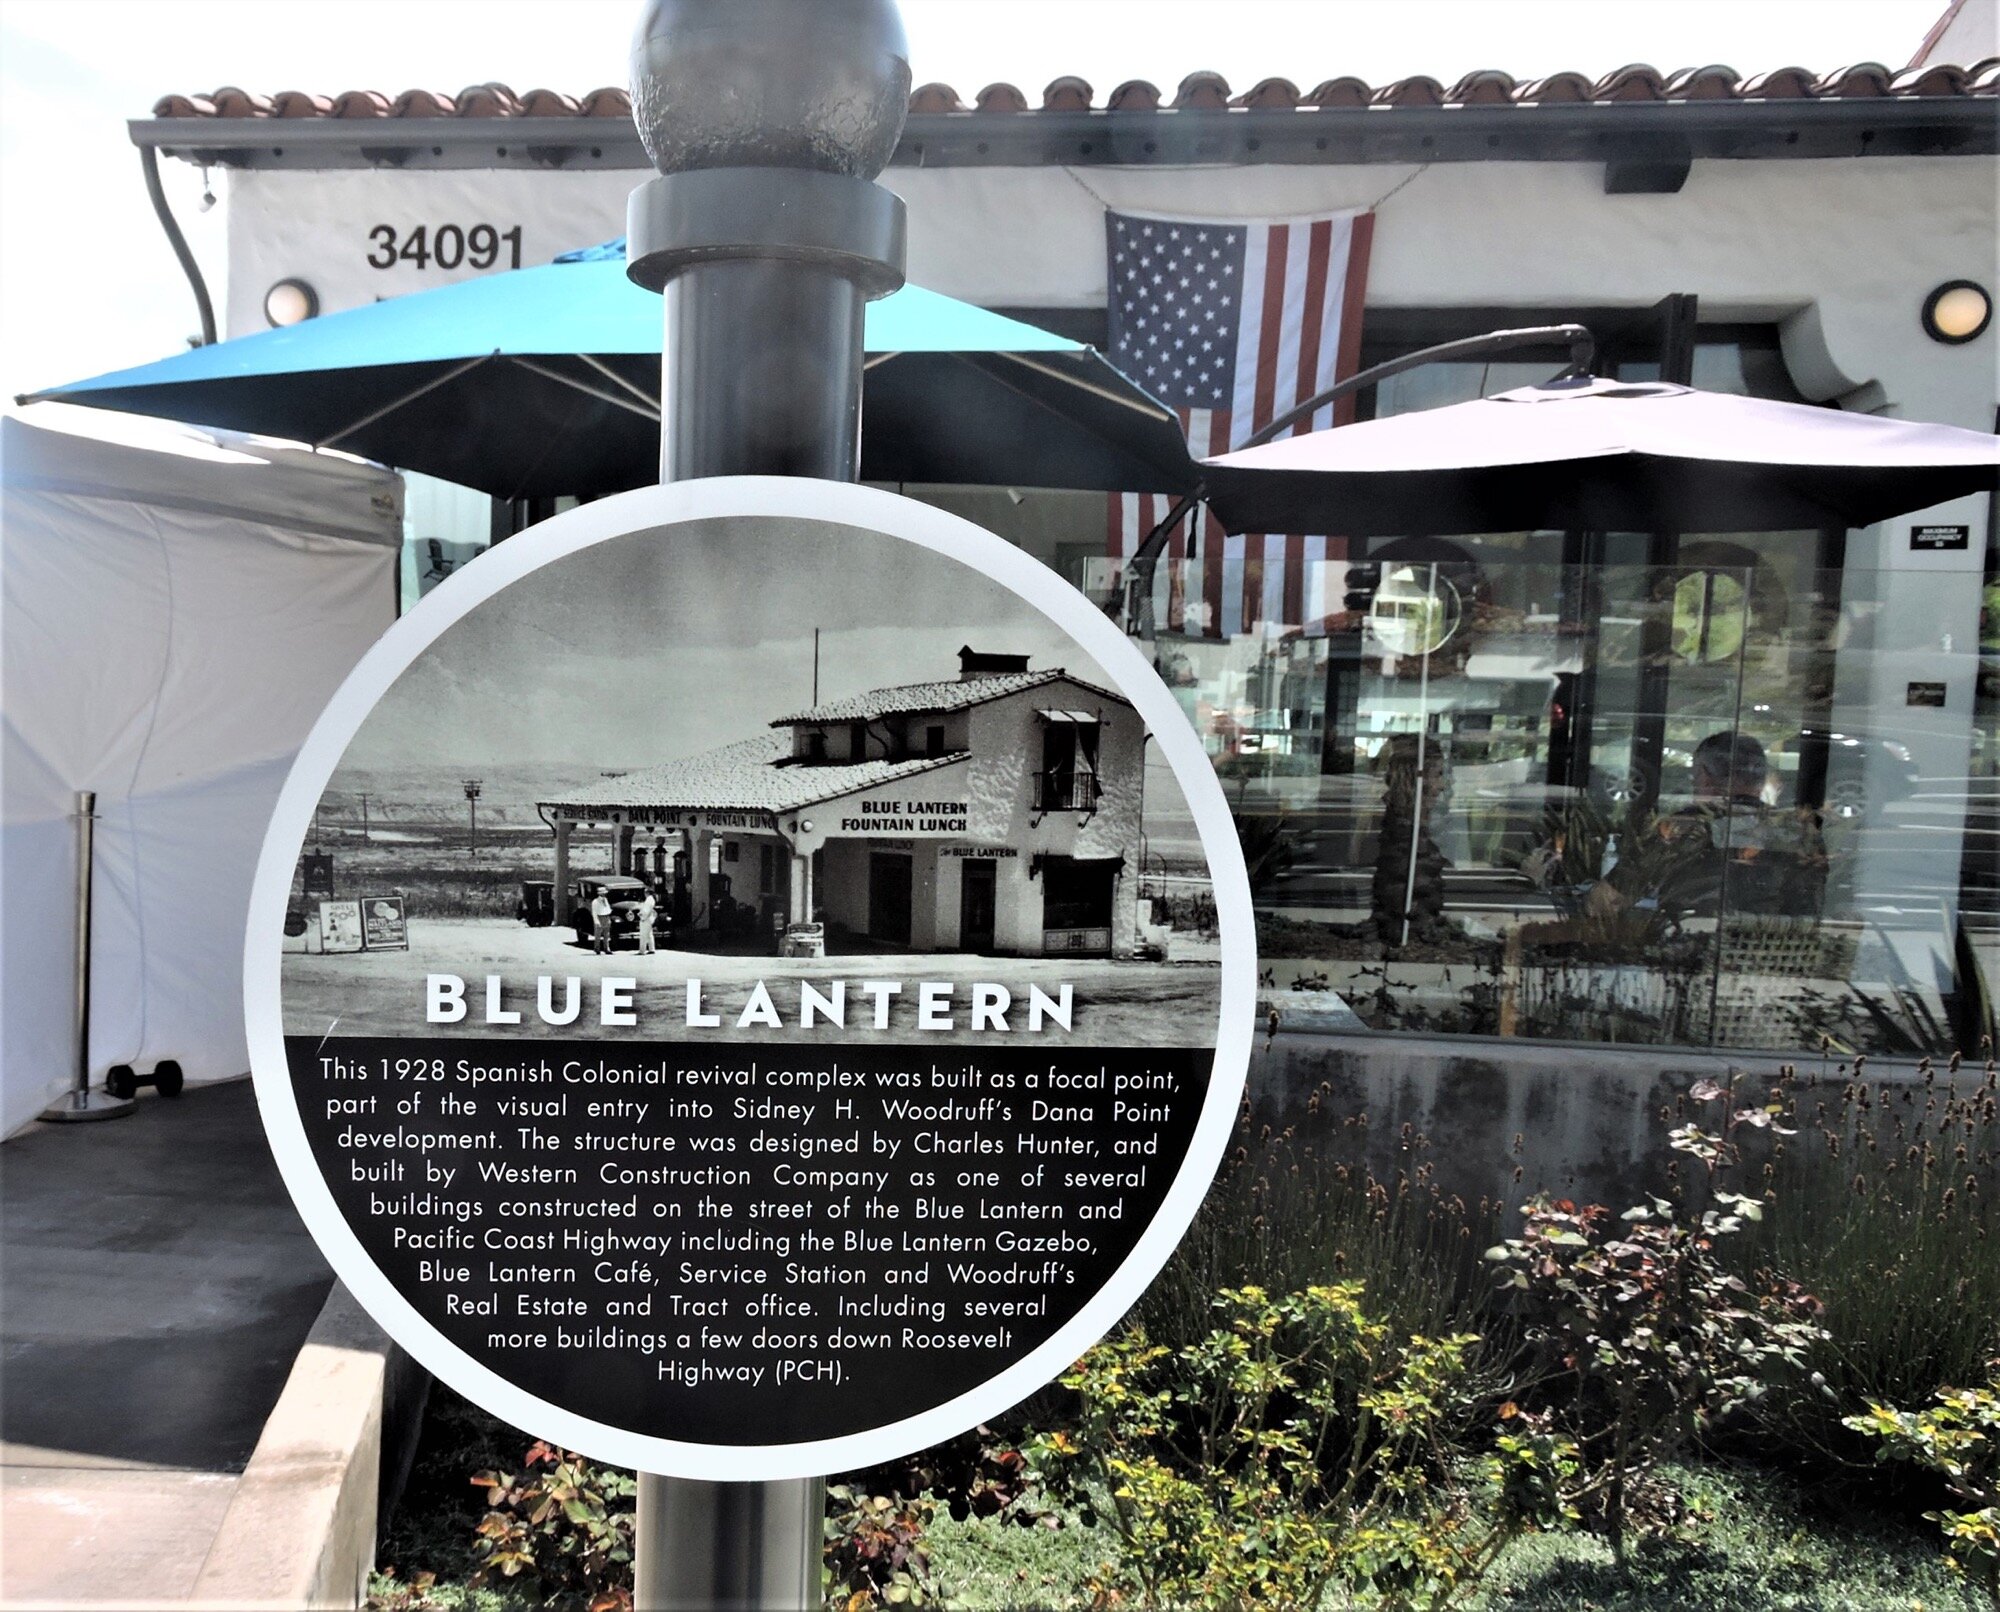 Blue Lantern Fountain Lunch &amp; Service Station, 34090 Pacific Coast Highway, Dana Point